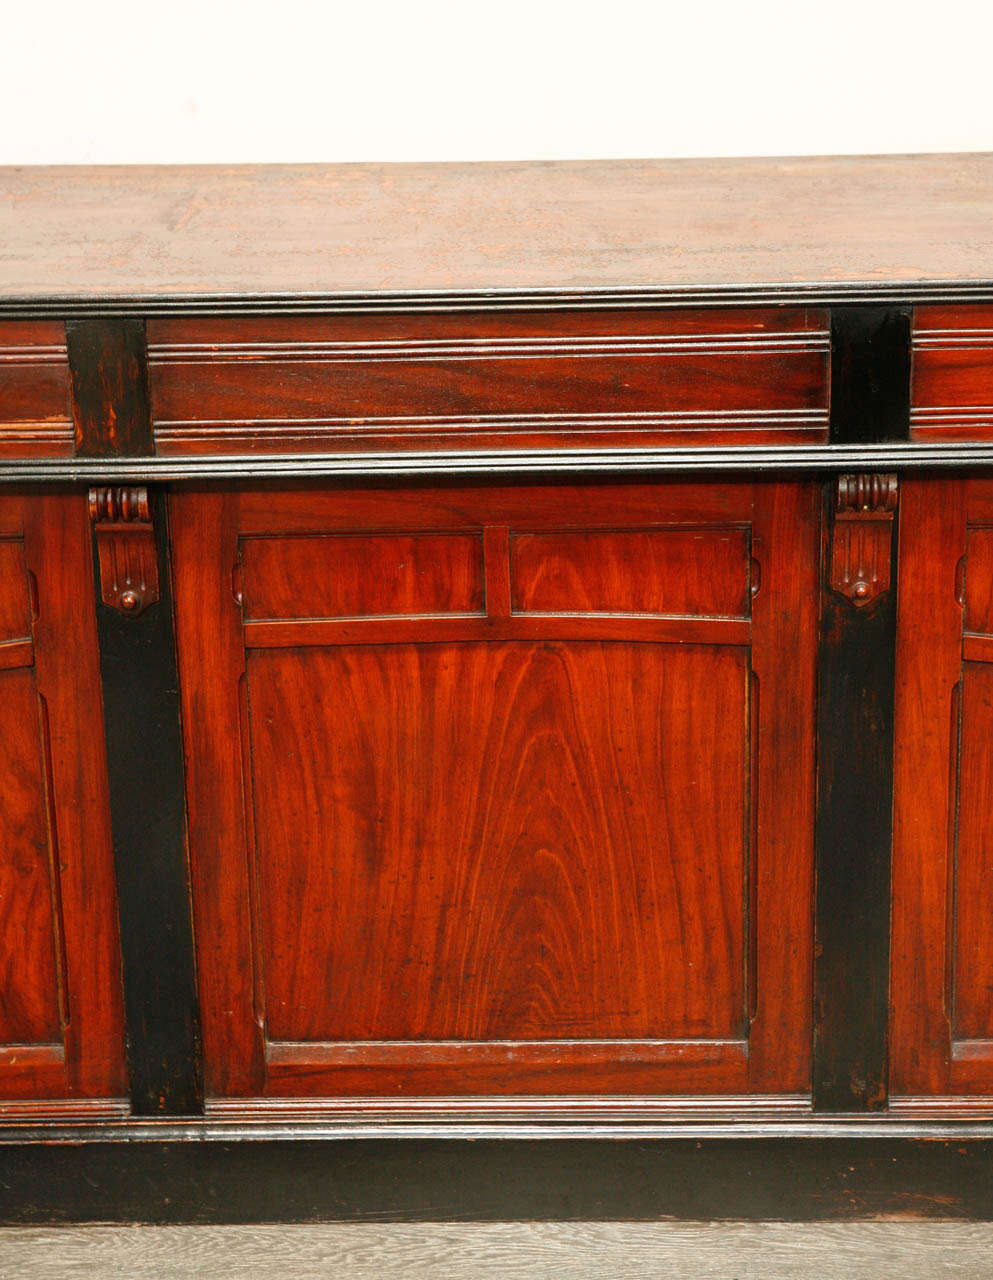 Traditional 19th-century Belgian shop counter with original painted finish. Functional as a sideboard or credenza, this handsome and well-patinated piece is a beautiful combination of form and function.  

Belgium, circa 1860

Dimensions: 79W x 23D